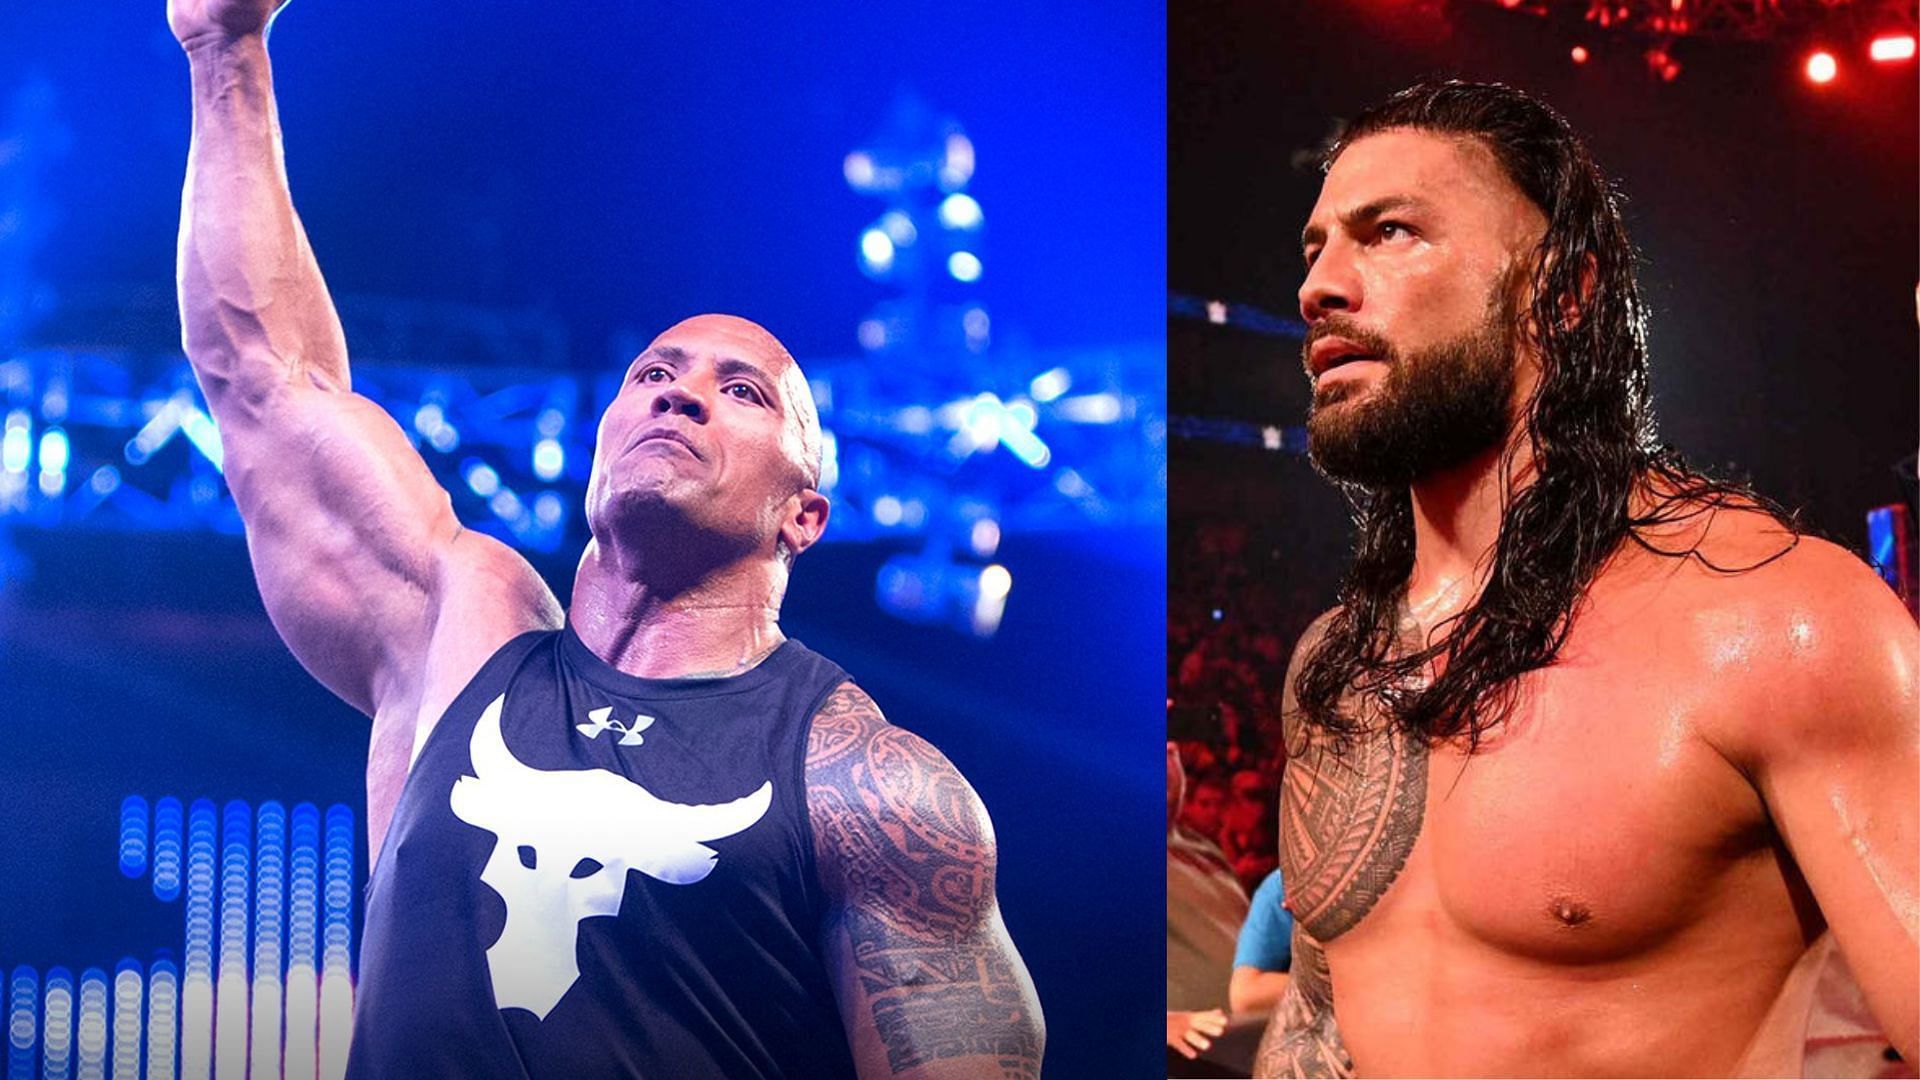 Does Roman Reigns think The Rock will be at WWE Royal Rumble 2023?